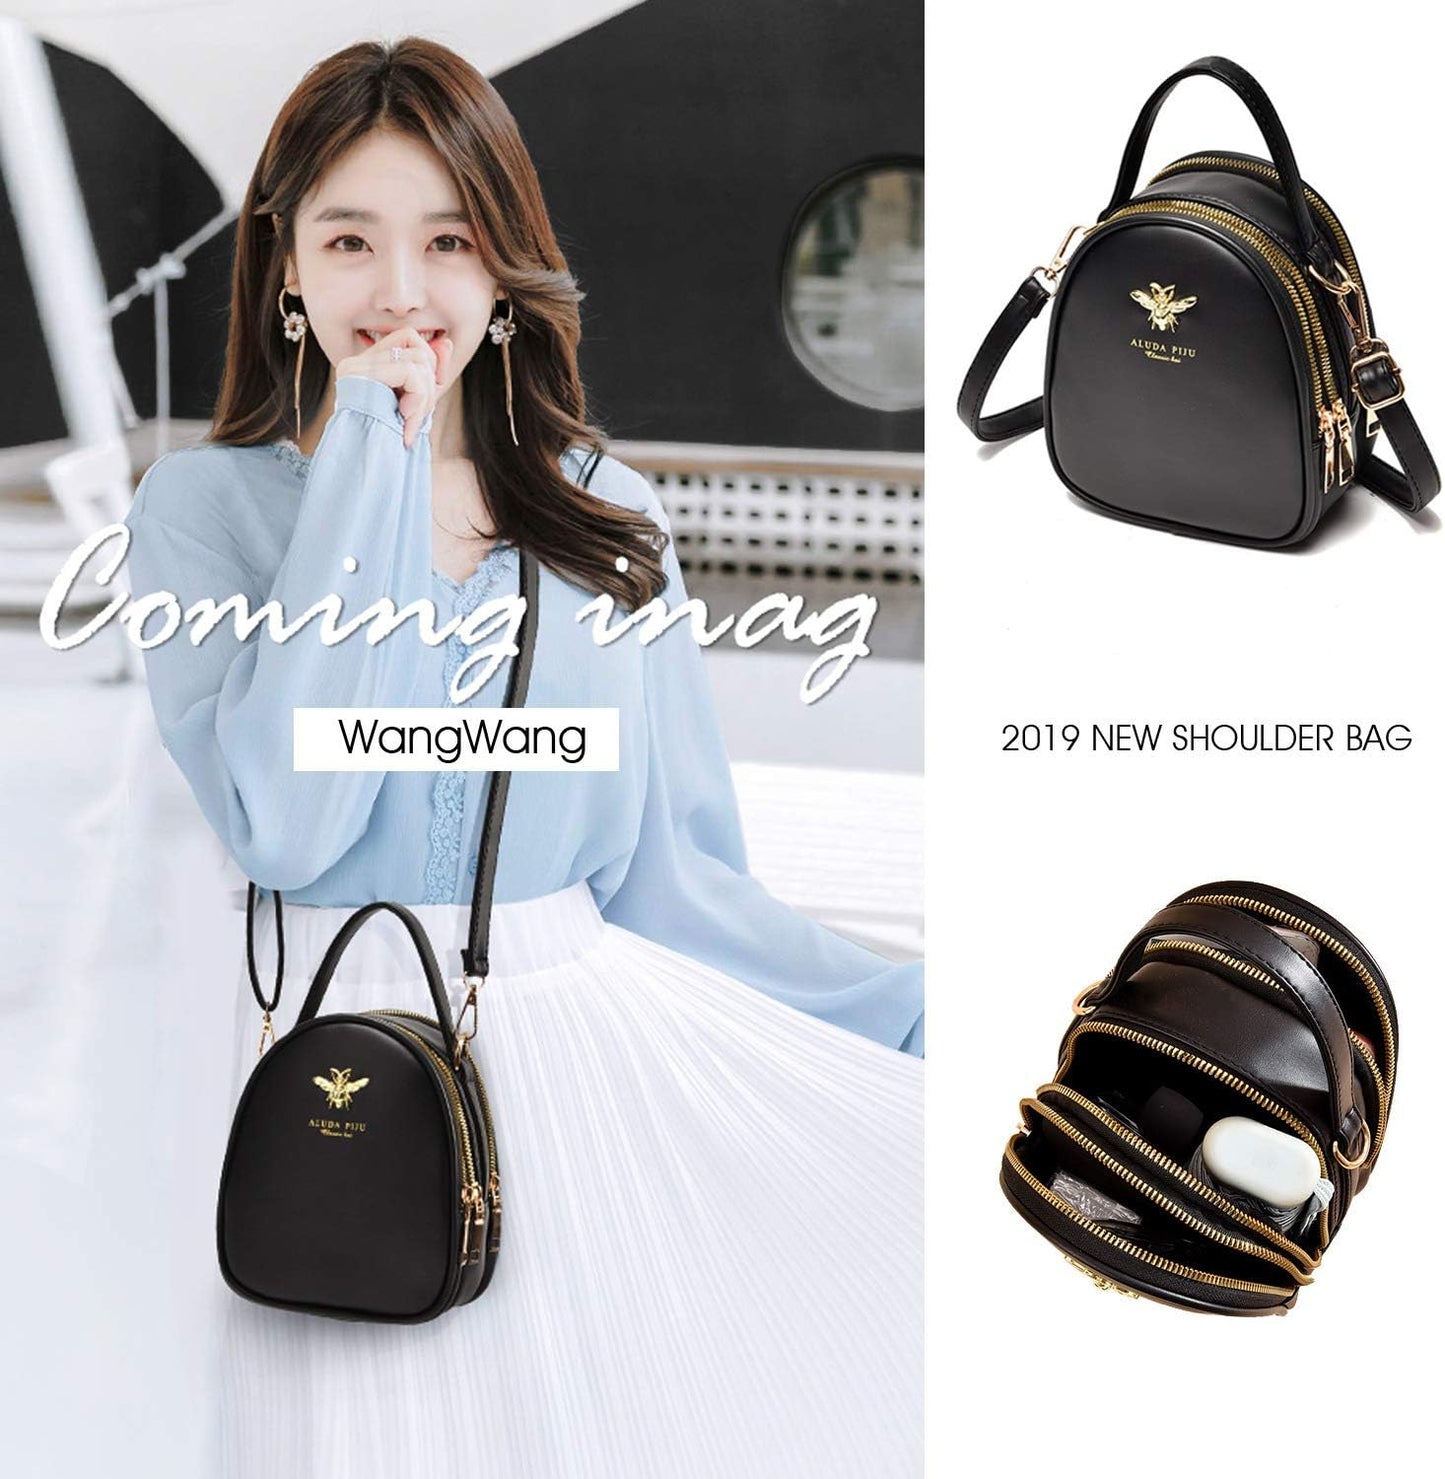 "Chic and Stylish Small Crossbody Shoulder Bag for Women - Perfect for Everyday Essentials!"